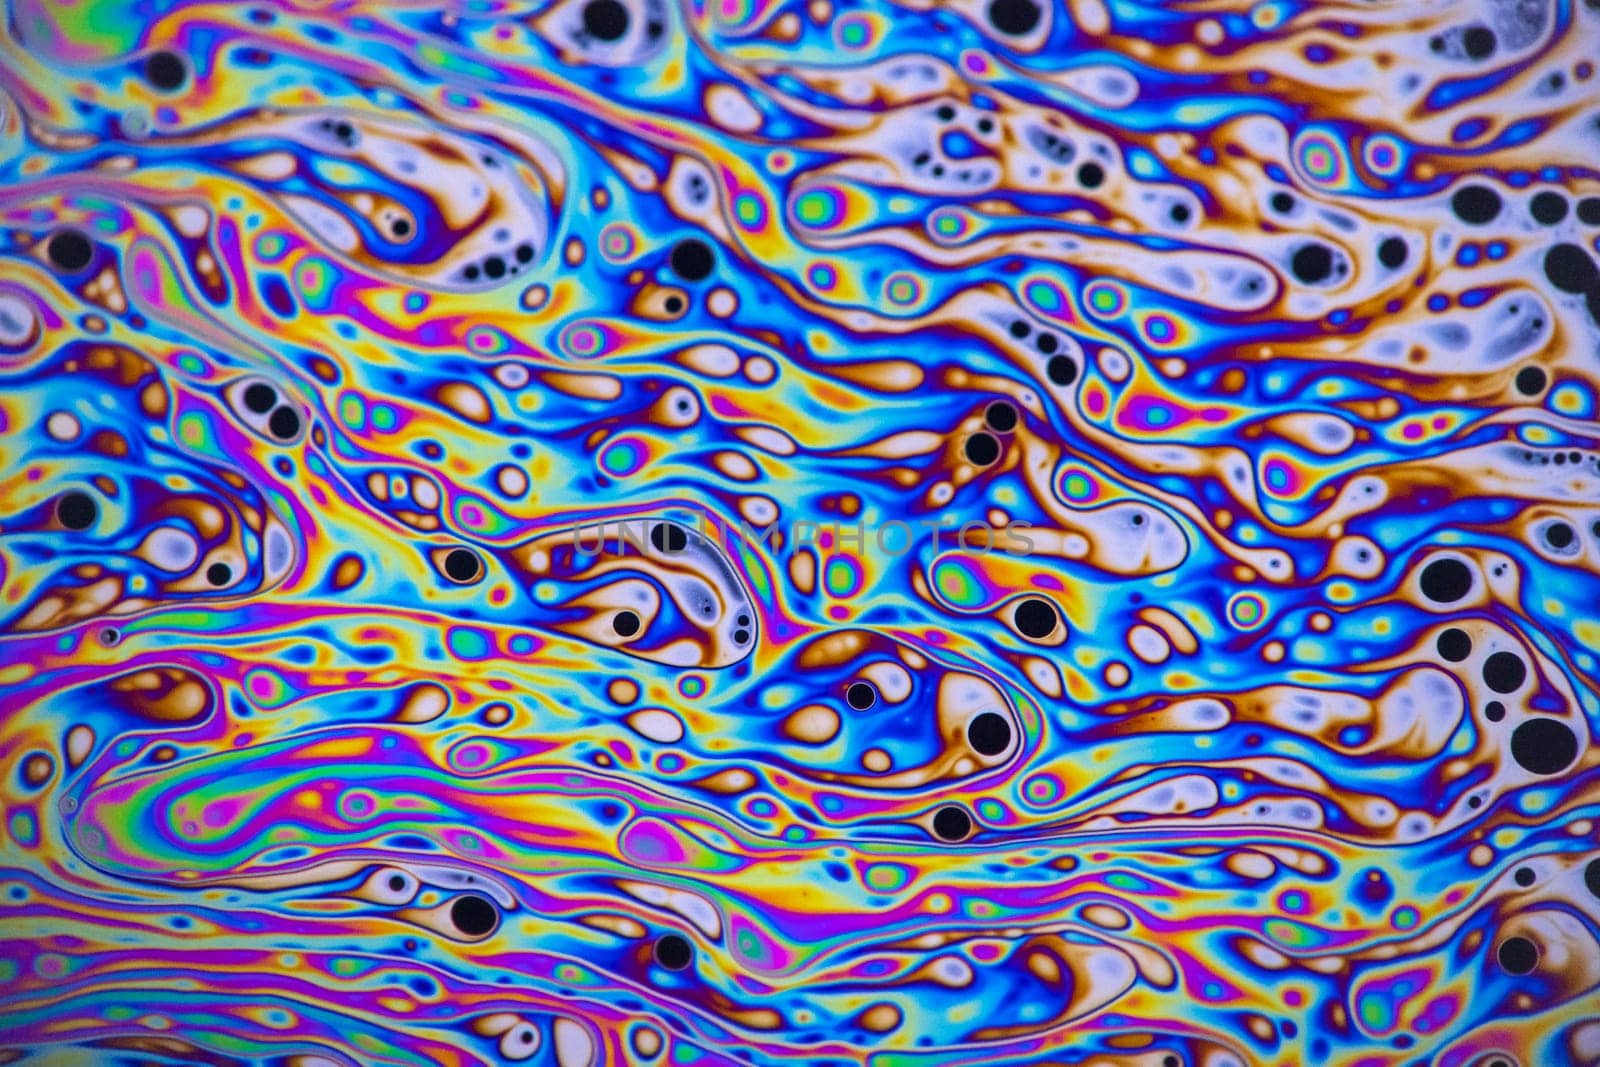 Bright green, pink, purple, blue and orange pastel colours swirl around intense black and white dots patterns on the surface of a soap bubble.